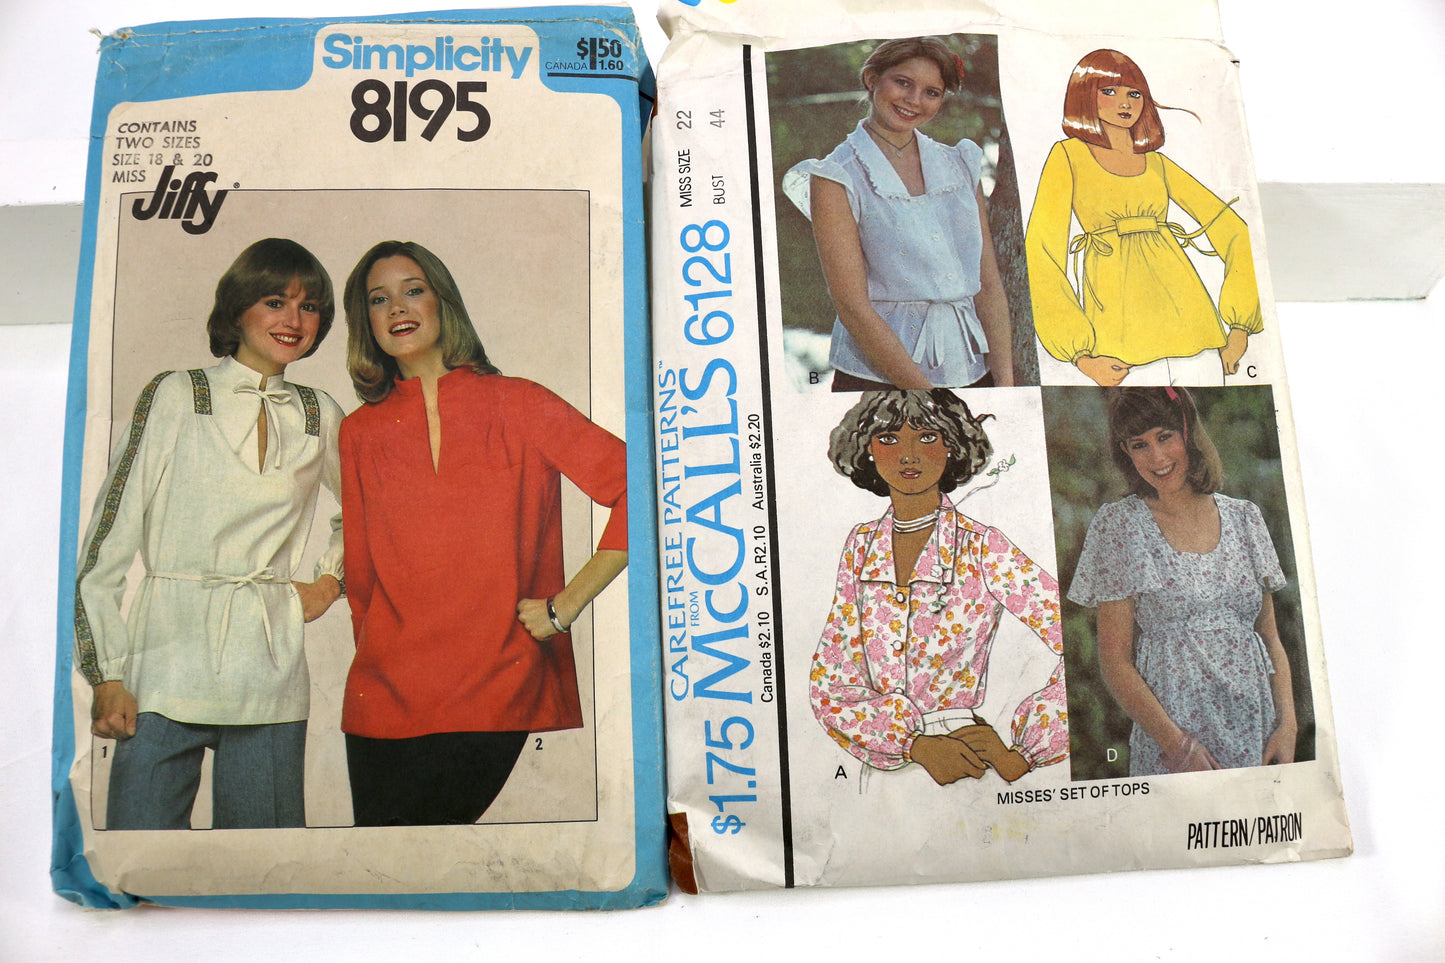 Simplicity 8195 Womens Top Sewing Pattern or McCalls 6128 Womens Top Sewing Pattern